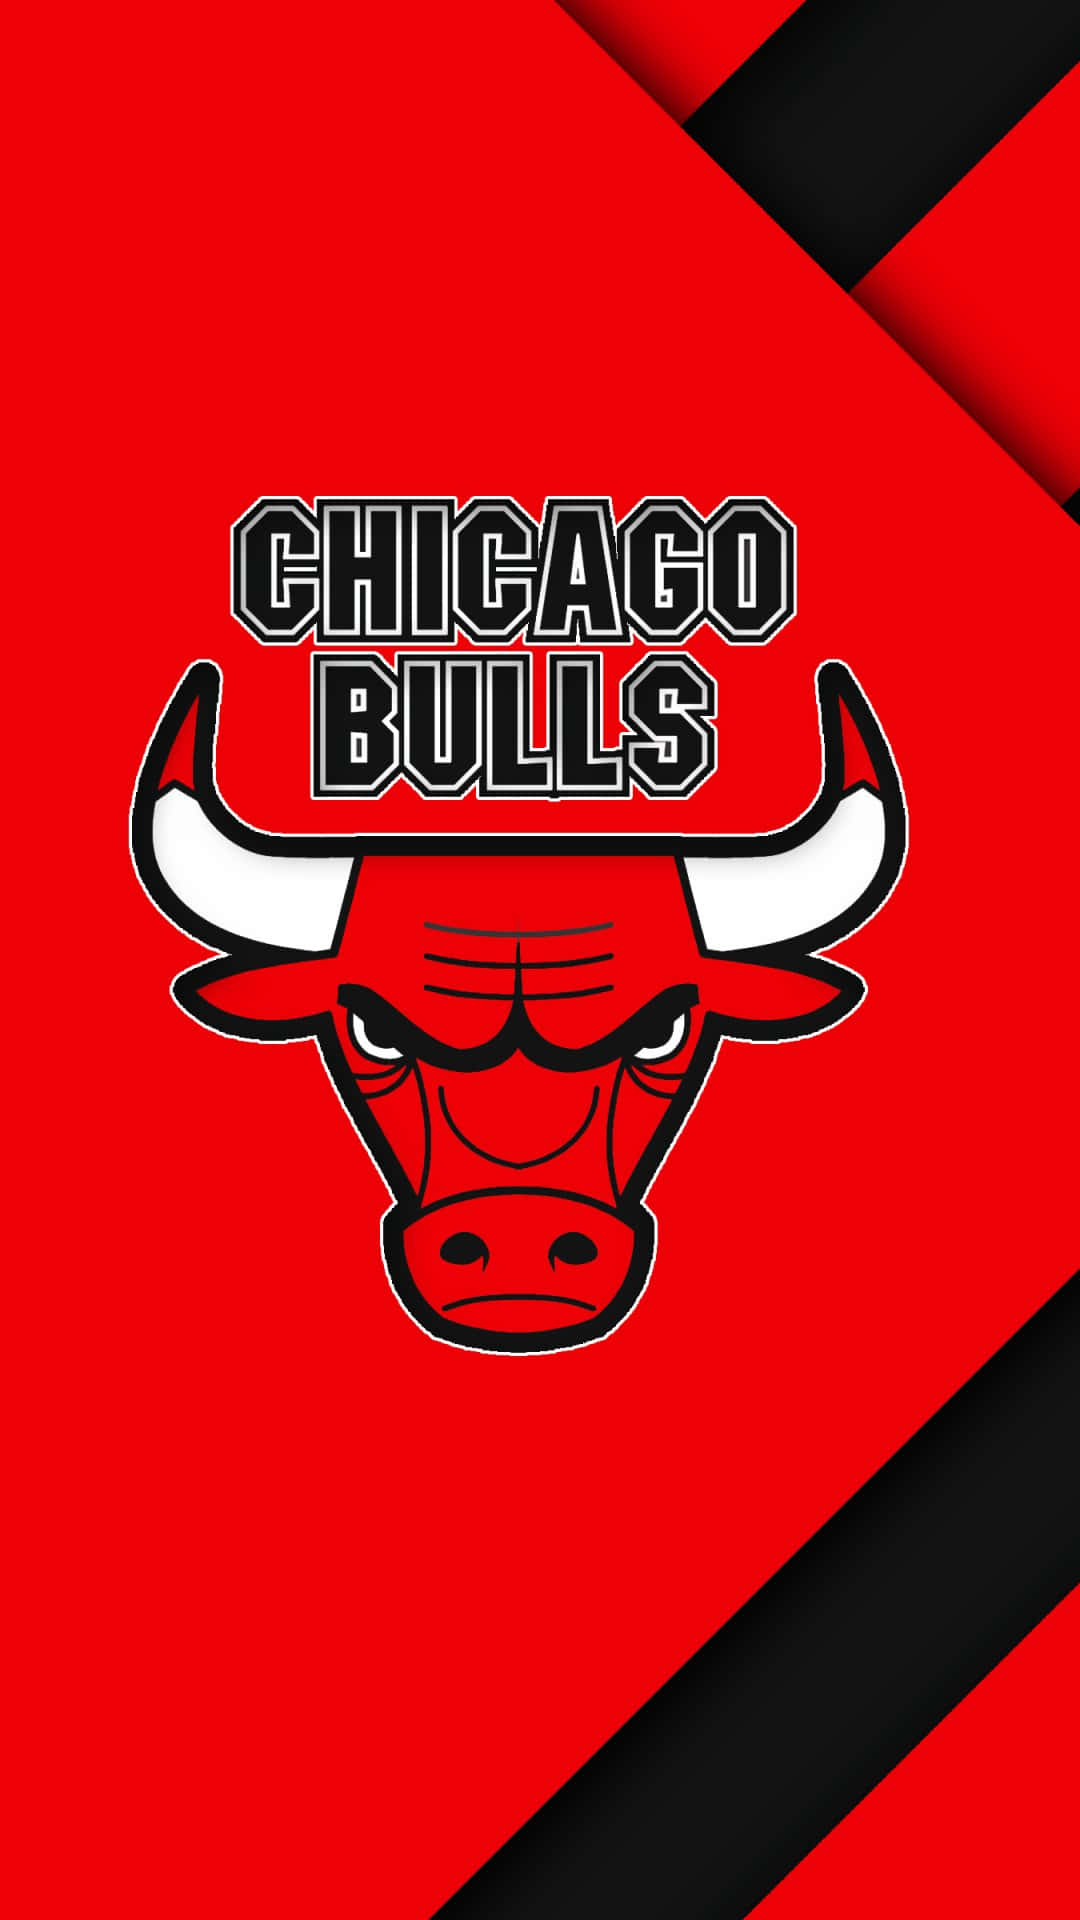 The official Chicago Bulls Phone Wallpaper